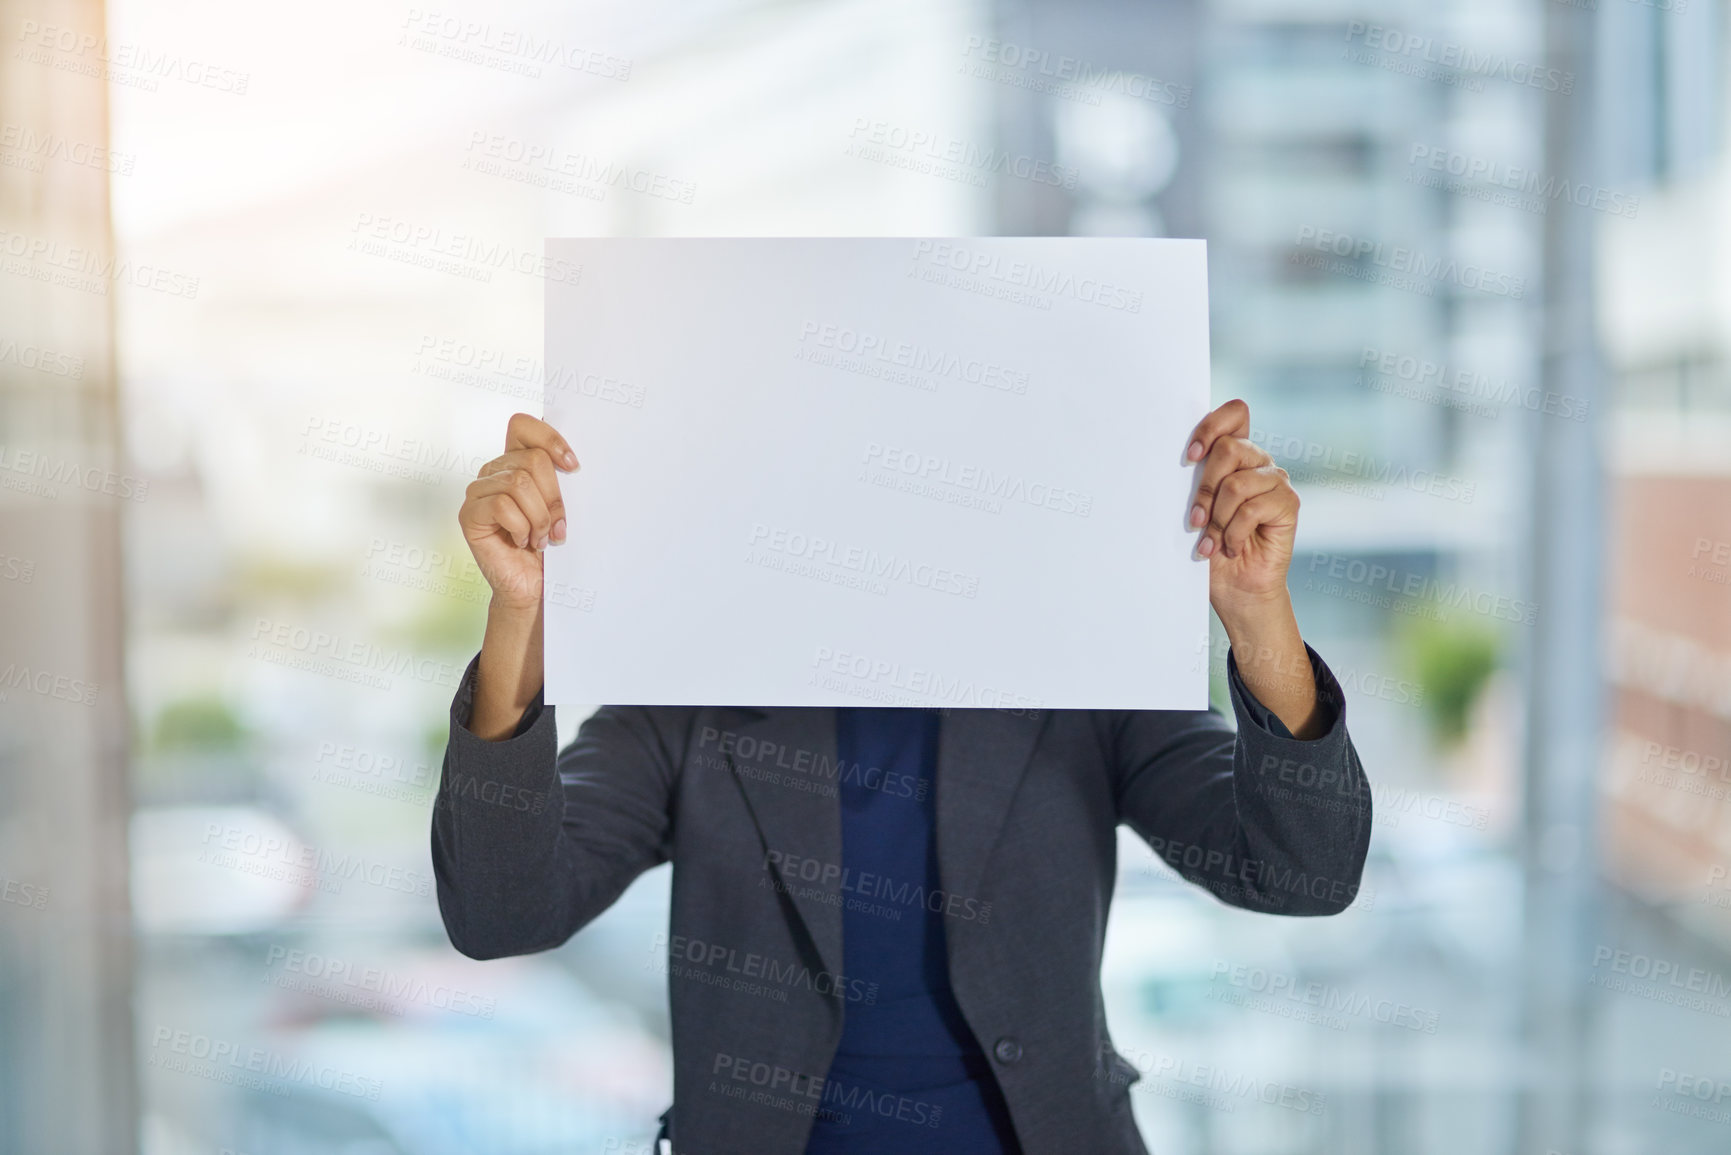 Buy stock photo Shot of a businesswoman holding up a blank placard